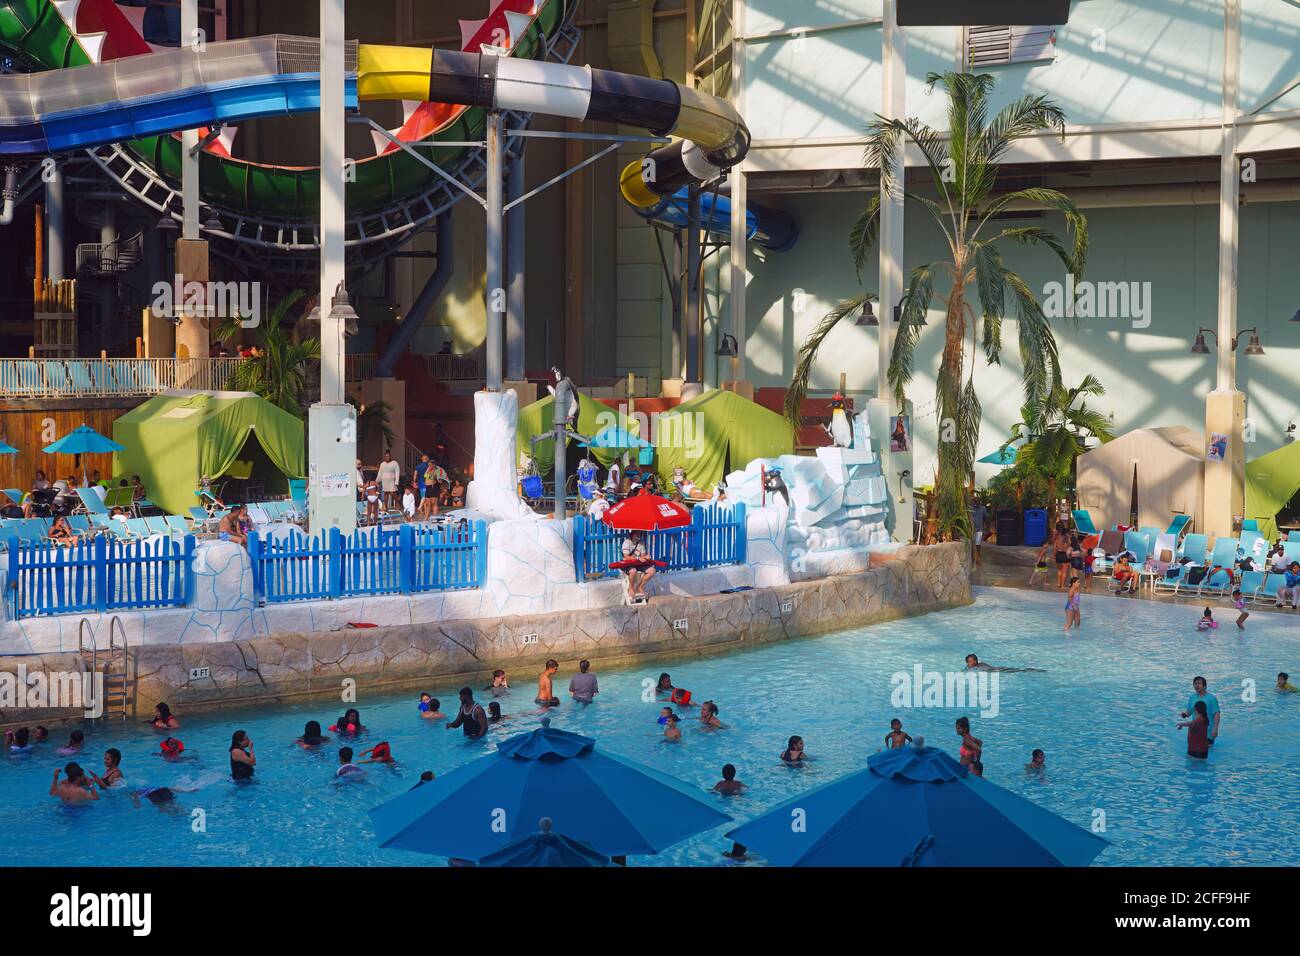 TANNERSVILLE, PA -30 AUG 2020- View of the Aquatopia indoor waterpark at the Camelback Mountain Resort, a large ski resort in the Poconos mountains in Stock Photo